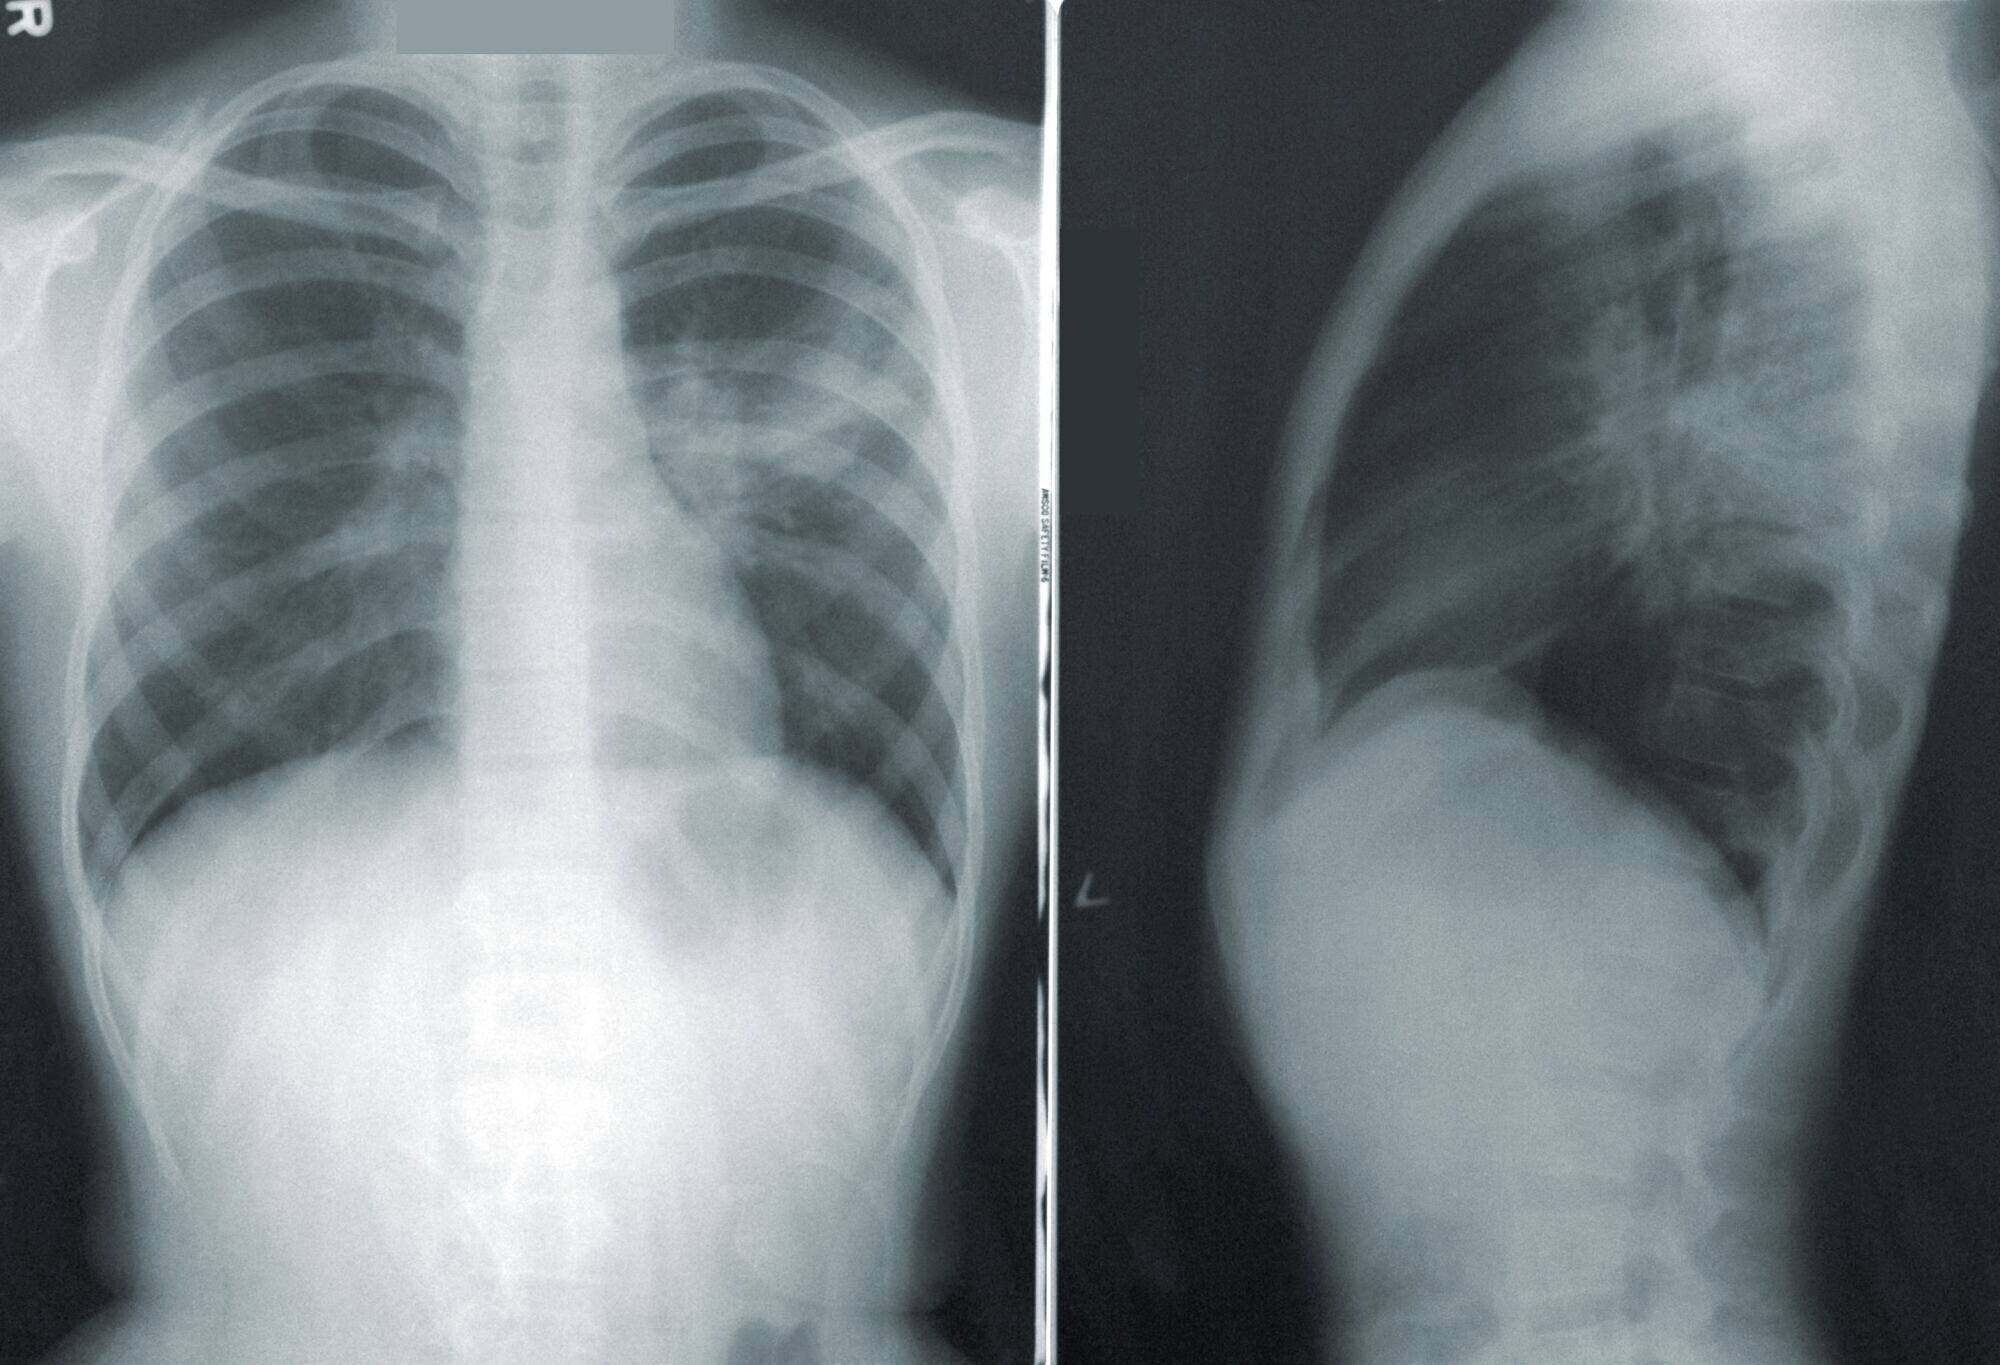 Pictures of a chest xray from front and side.